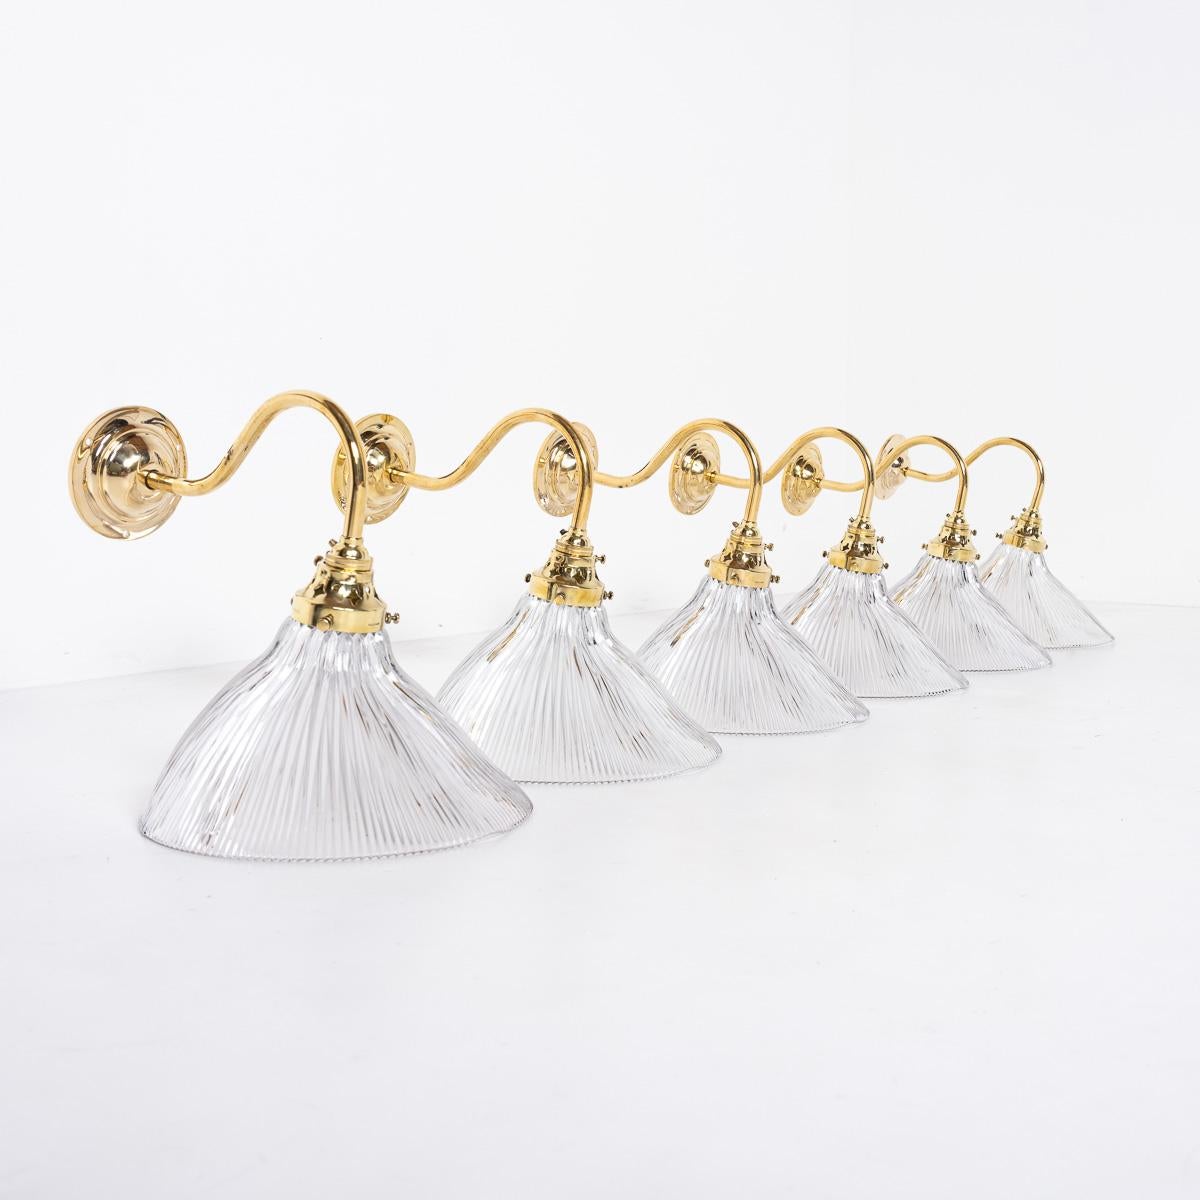 ANTIQUE ANGLED HOLOPHANE PRISMATIC GLASS WALL LIGHTS
PRICE IS PER LIGHT

An stunning run of antique Holophane prismatic glass lights with original aged brass fittings, swan neck wall brackets with heavy cast brass wall plates.

Fittings are all